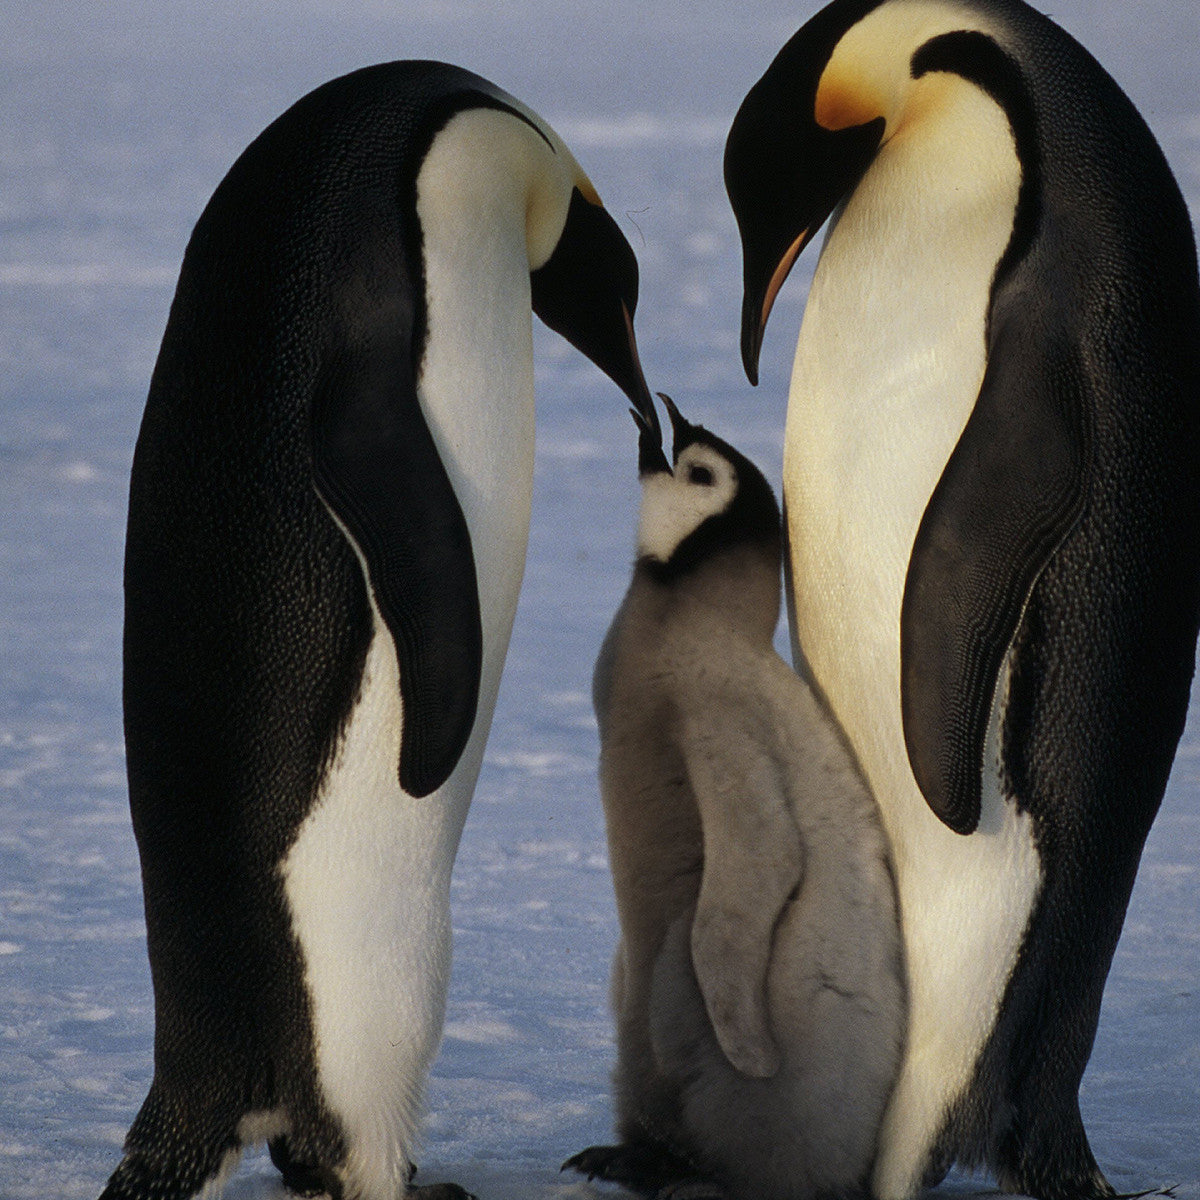 A photo of an emperor penguin mother and father feeding their young chick